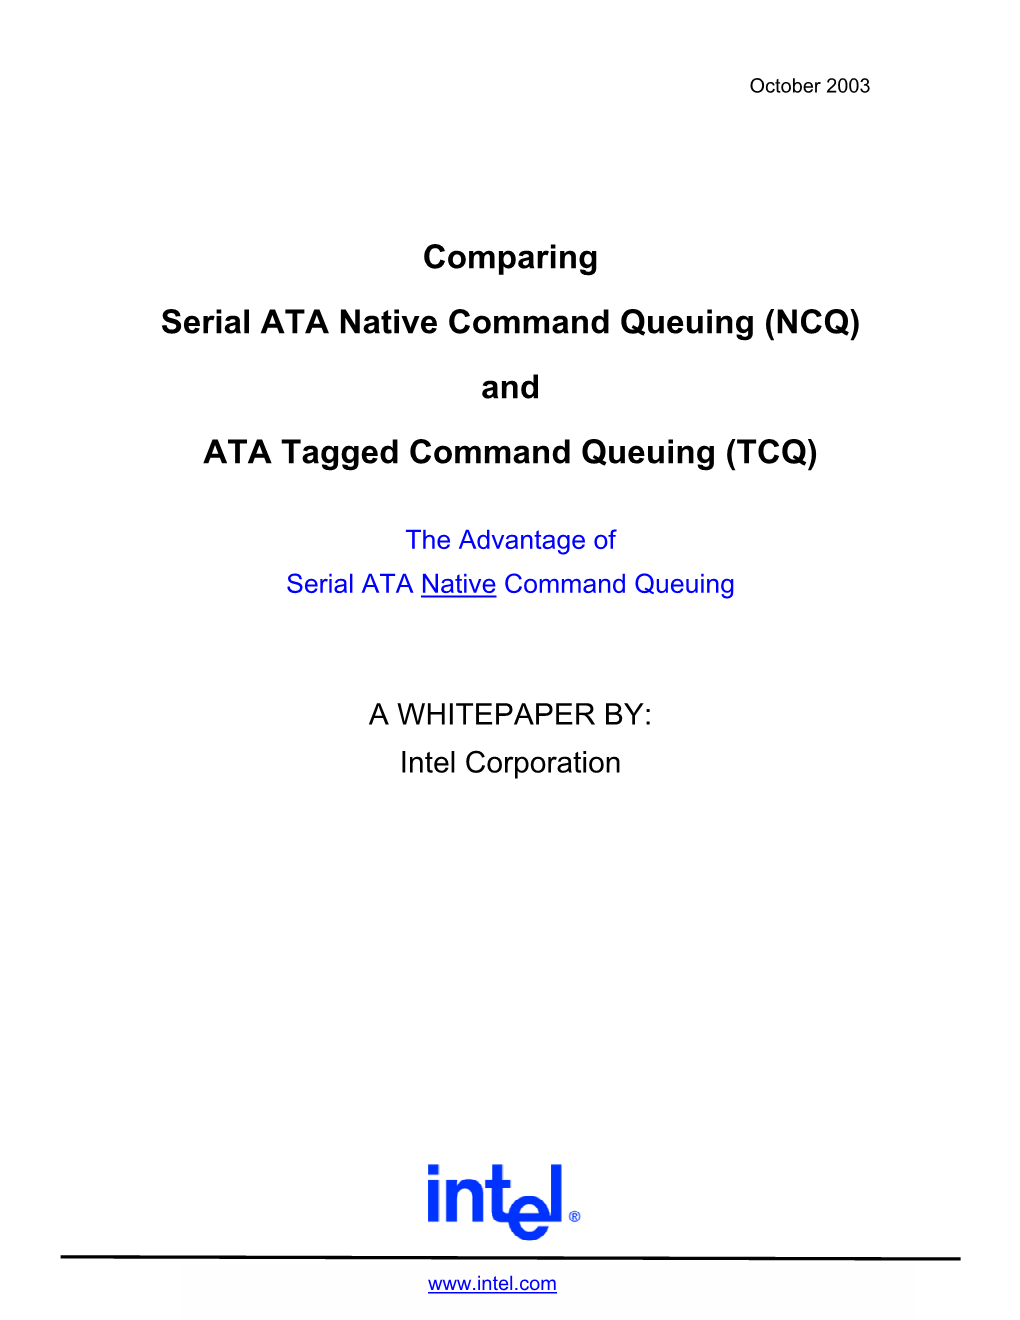 NCQ) and ATA Tagged Command Queuing (TCQ